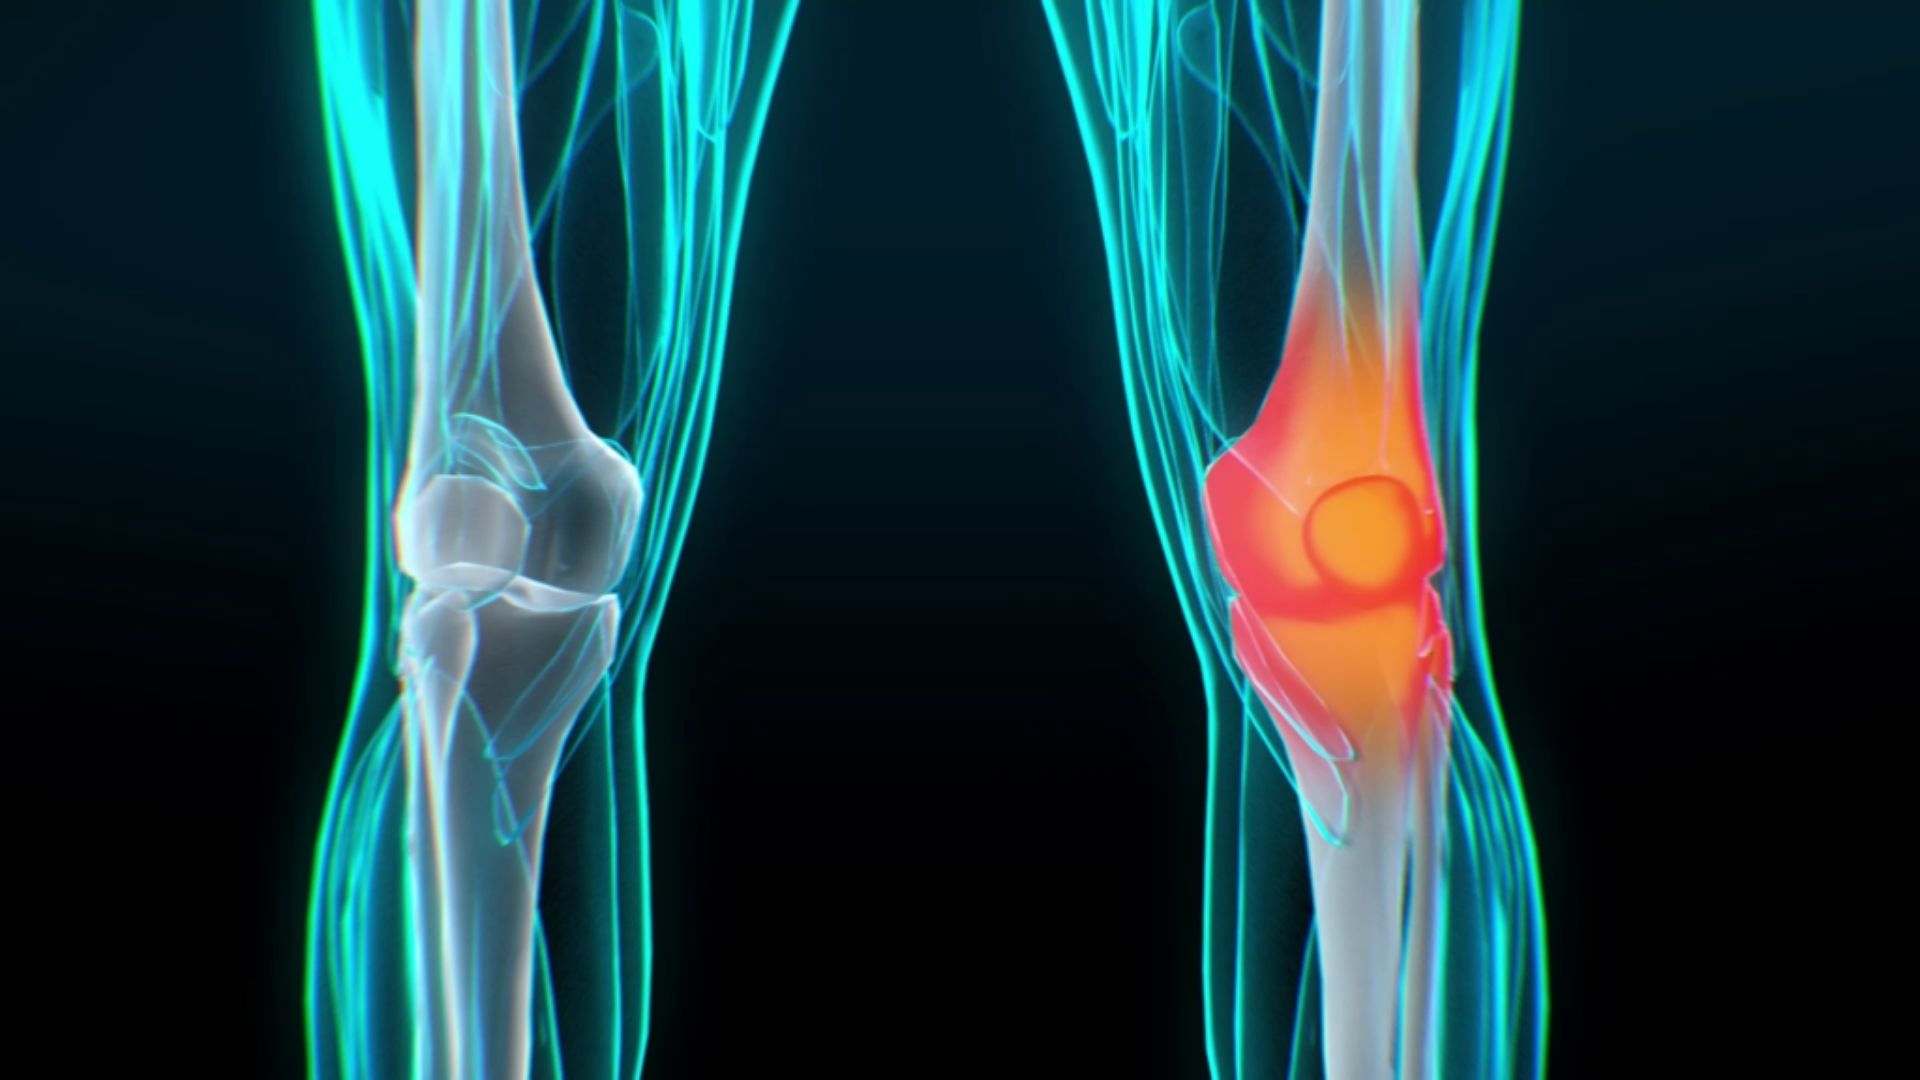 Inflammation of the knee - Explainer Video by Darvideo